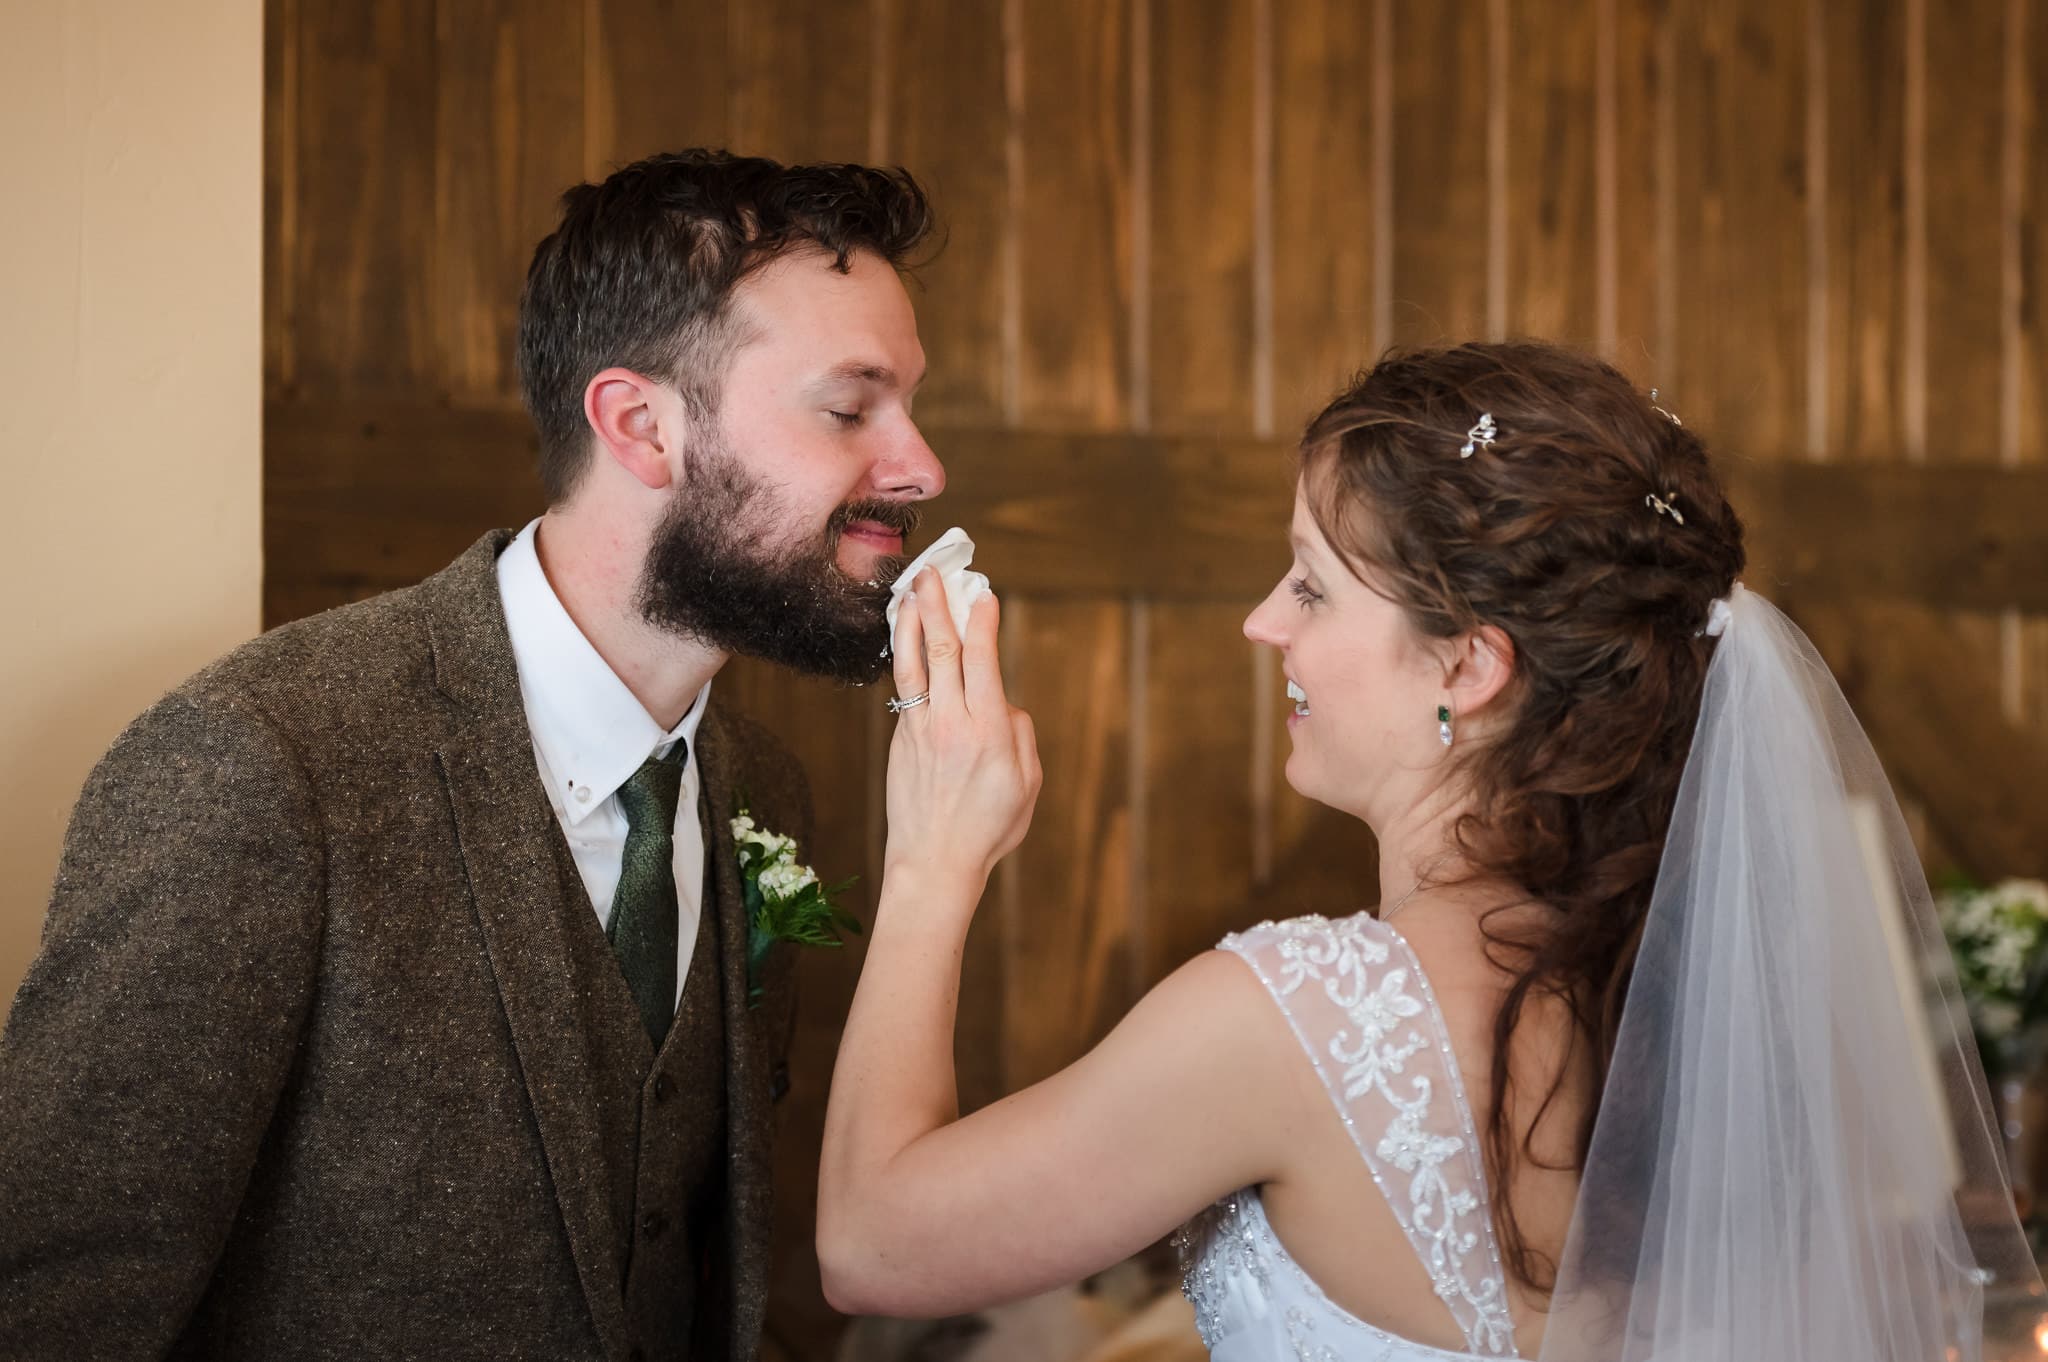 The bride wipes crumbs and frosting from the beard of her husband following the traditional cake smash at their wedding.